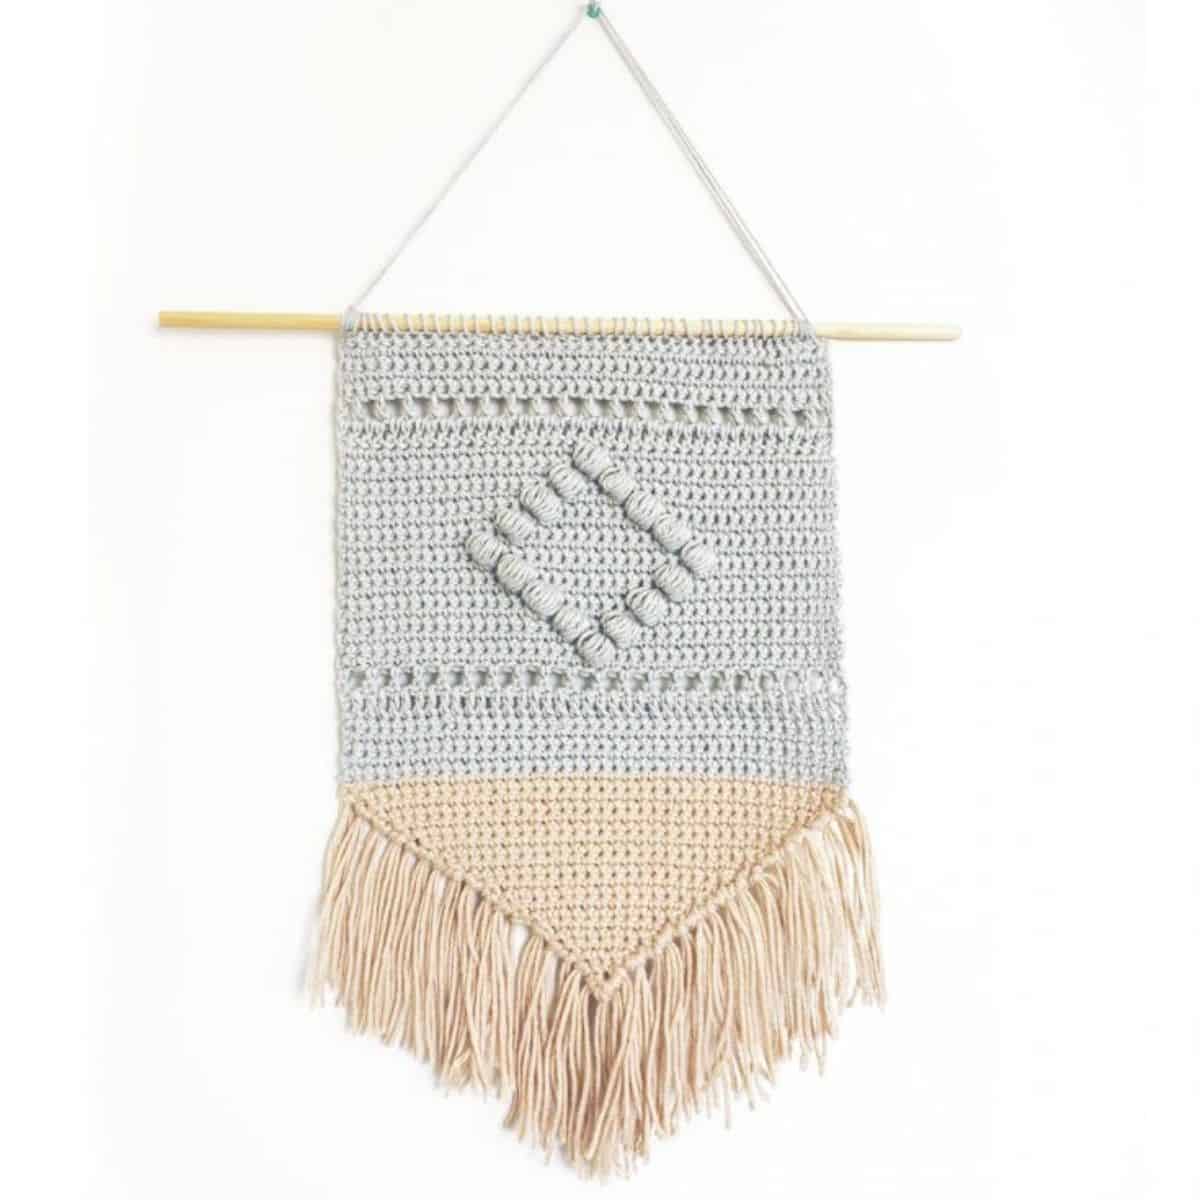 2 toned wall hanging with a diamond puff center and fringe